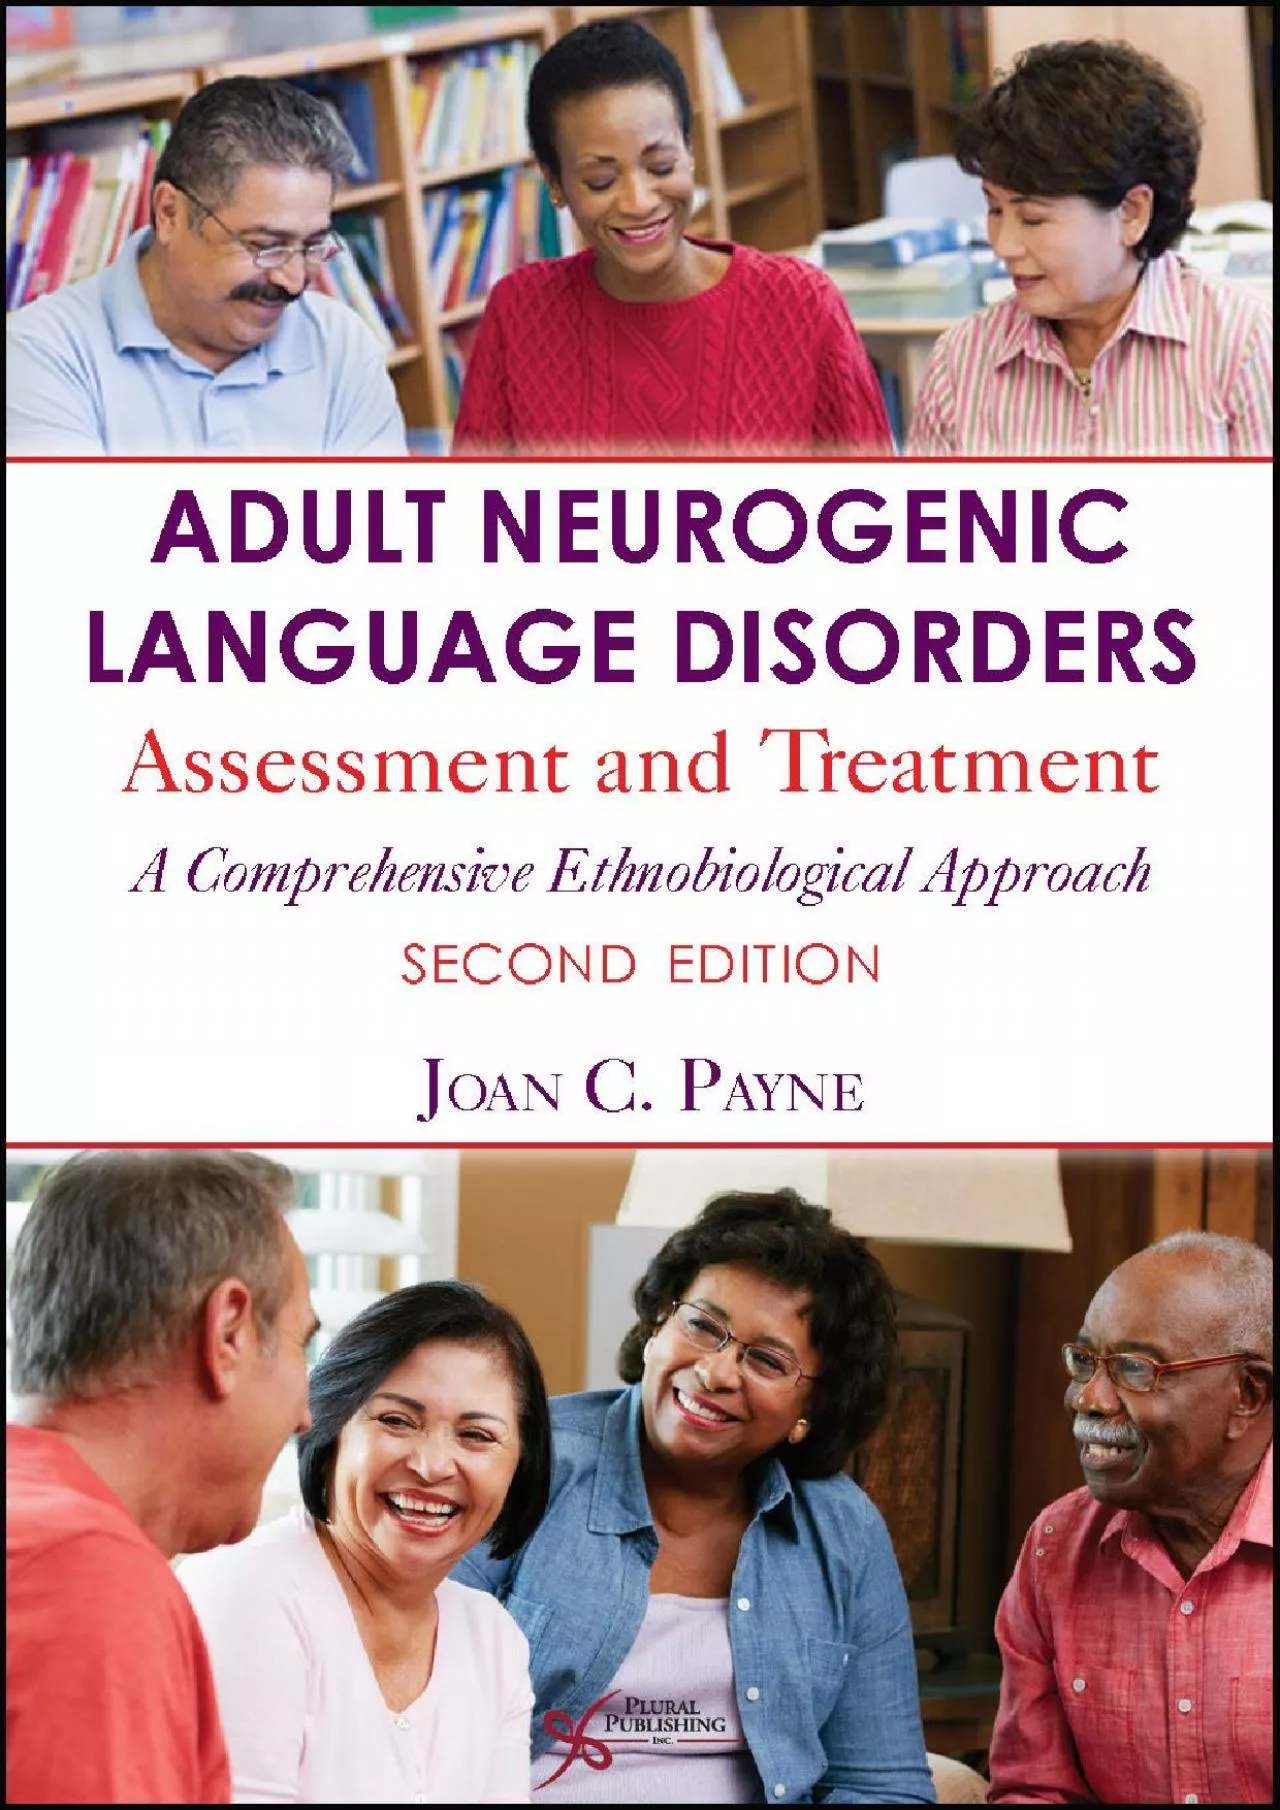 (BOOK)-Adult Neurogenic Language Disorders: Assessment and Treatment. A Comprehensive